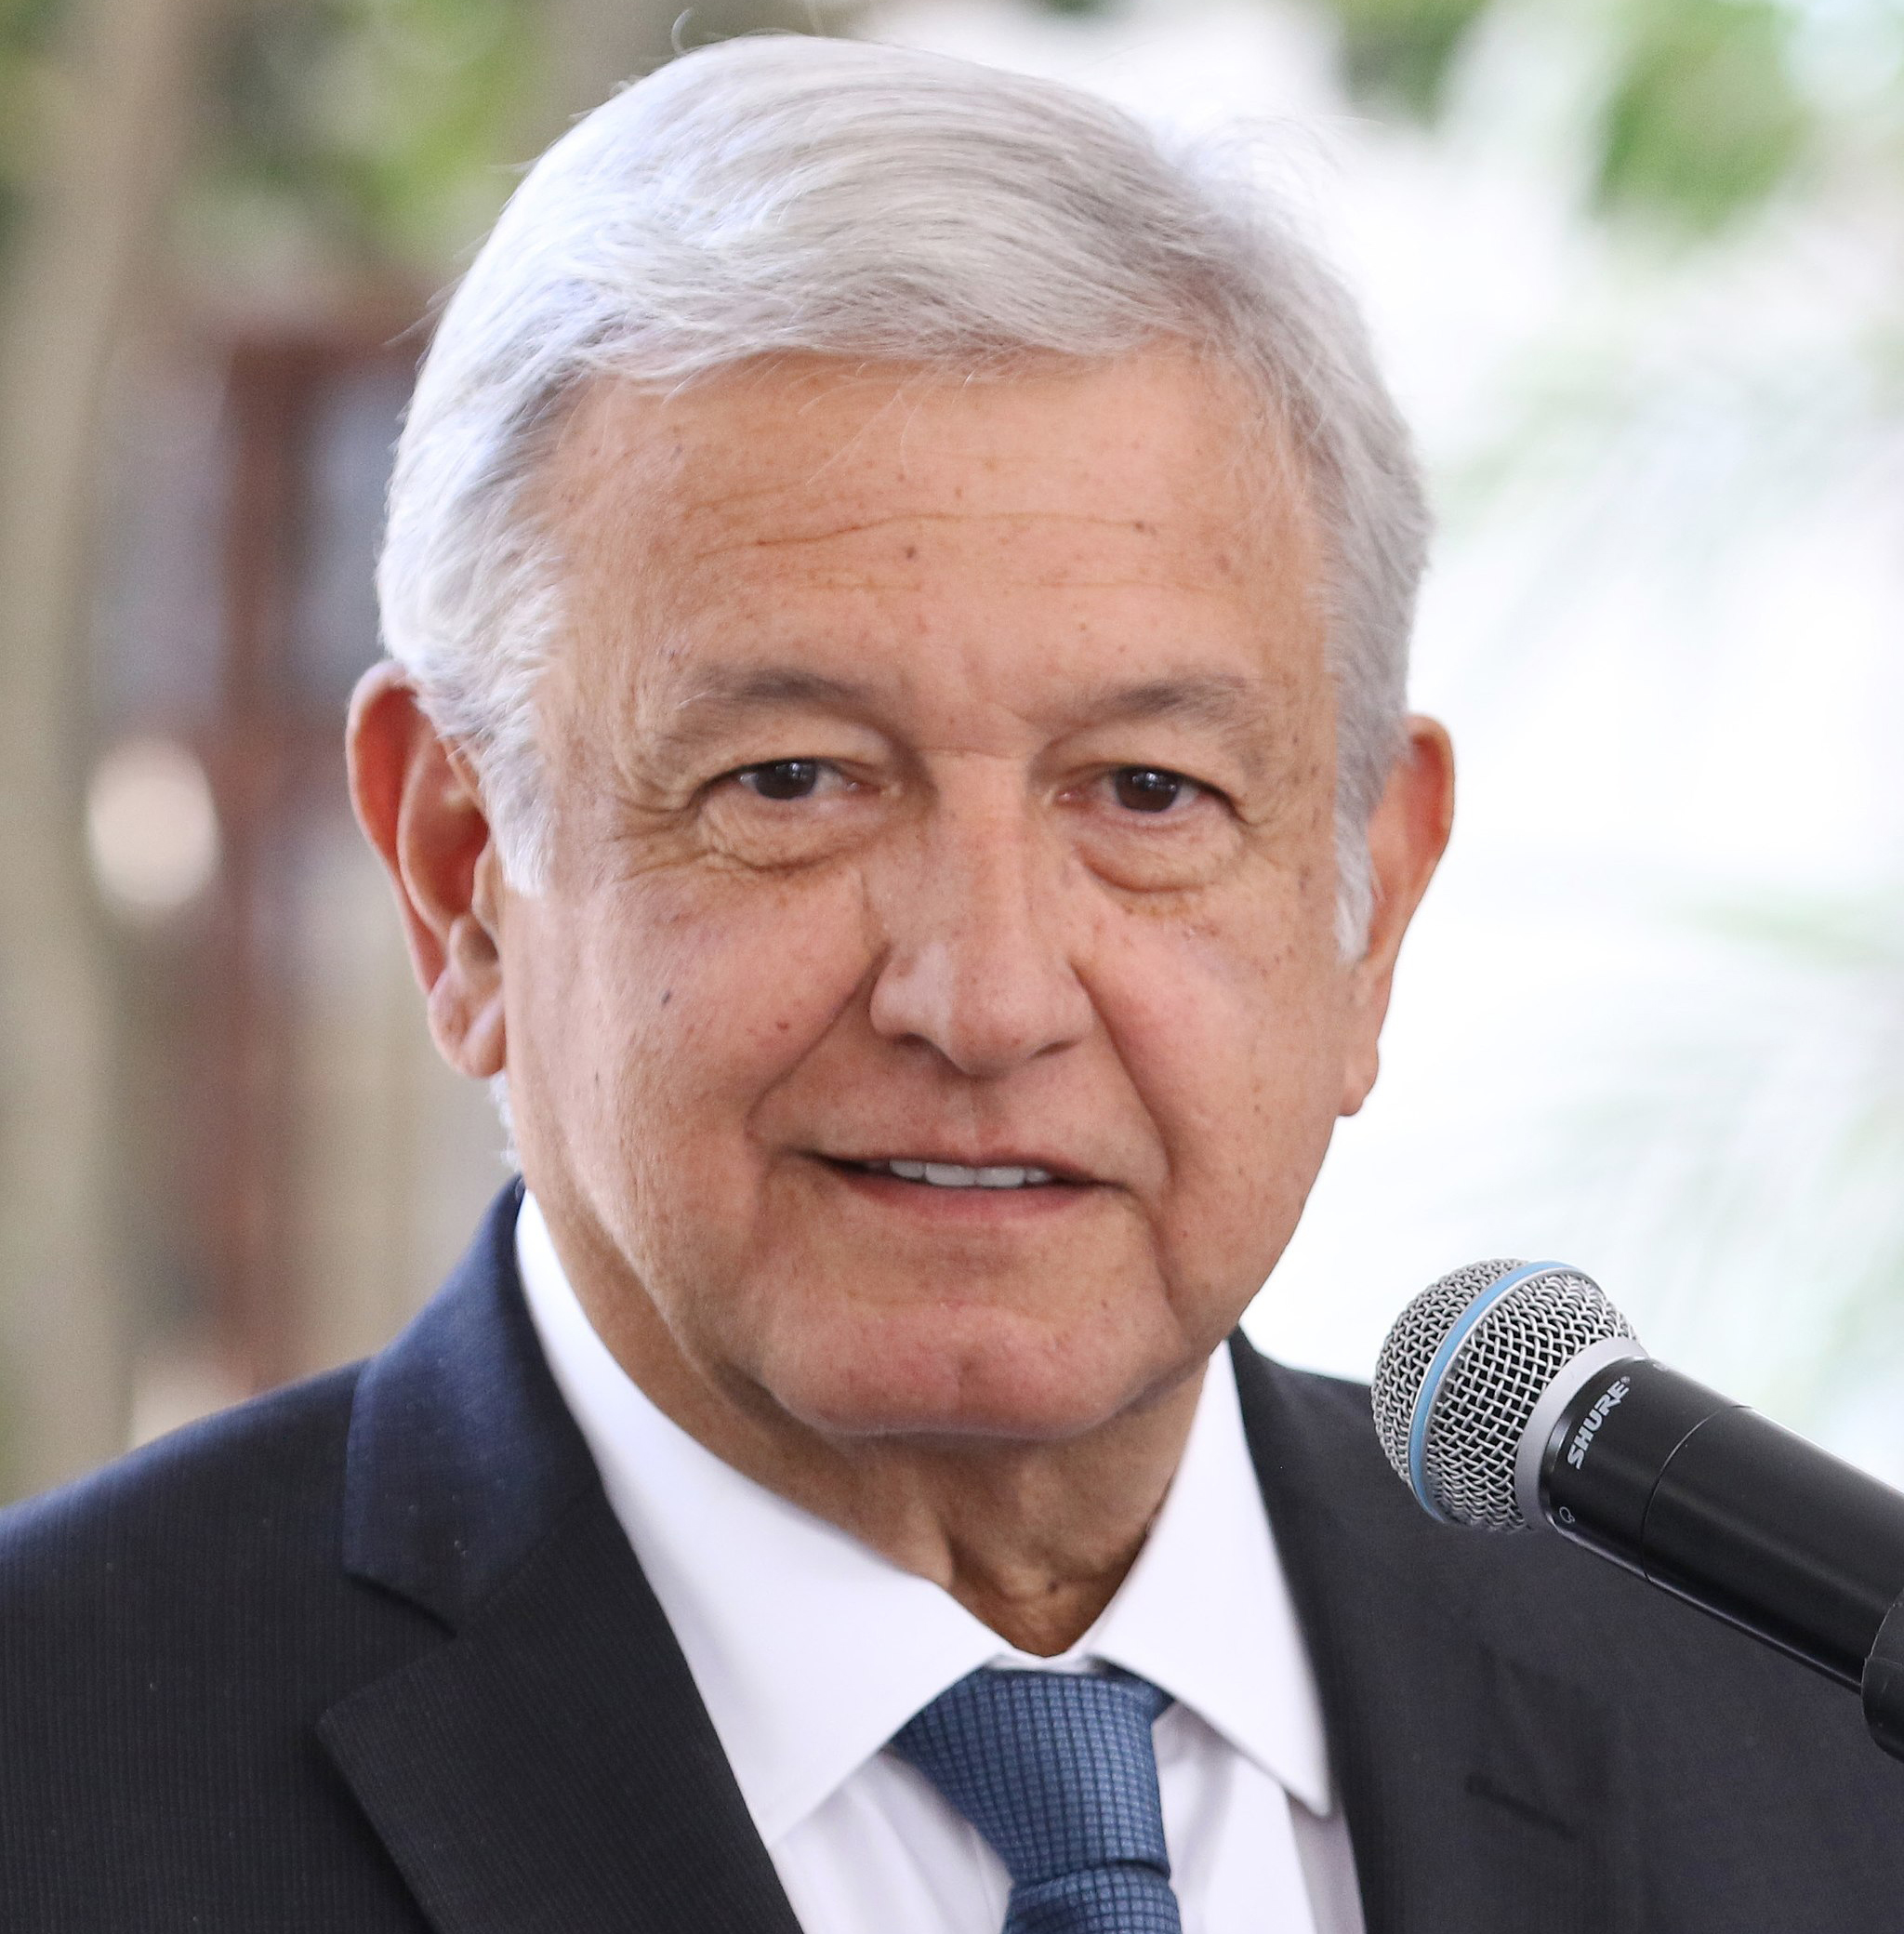 Mexico’s president pledged to defend Indigenous rights, but he’s